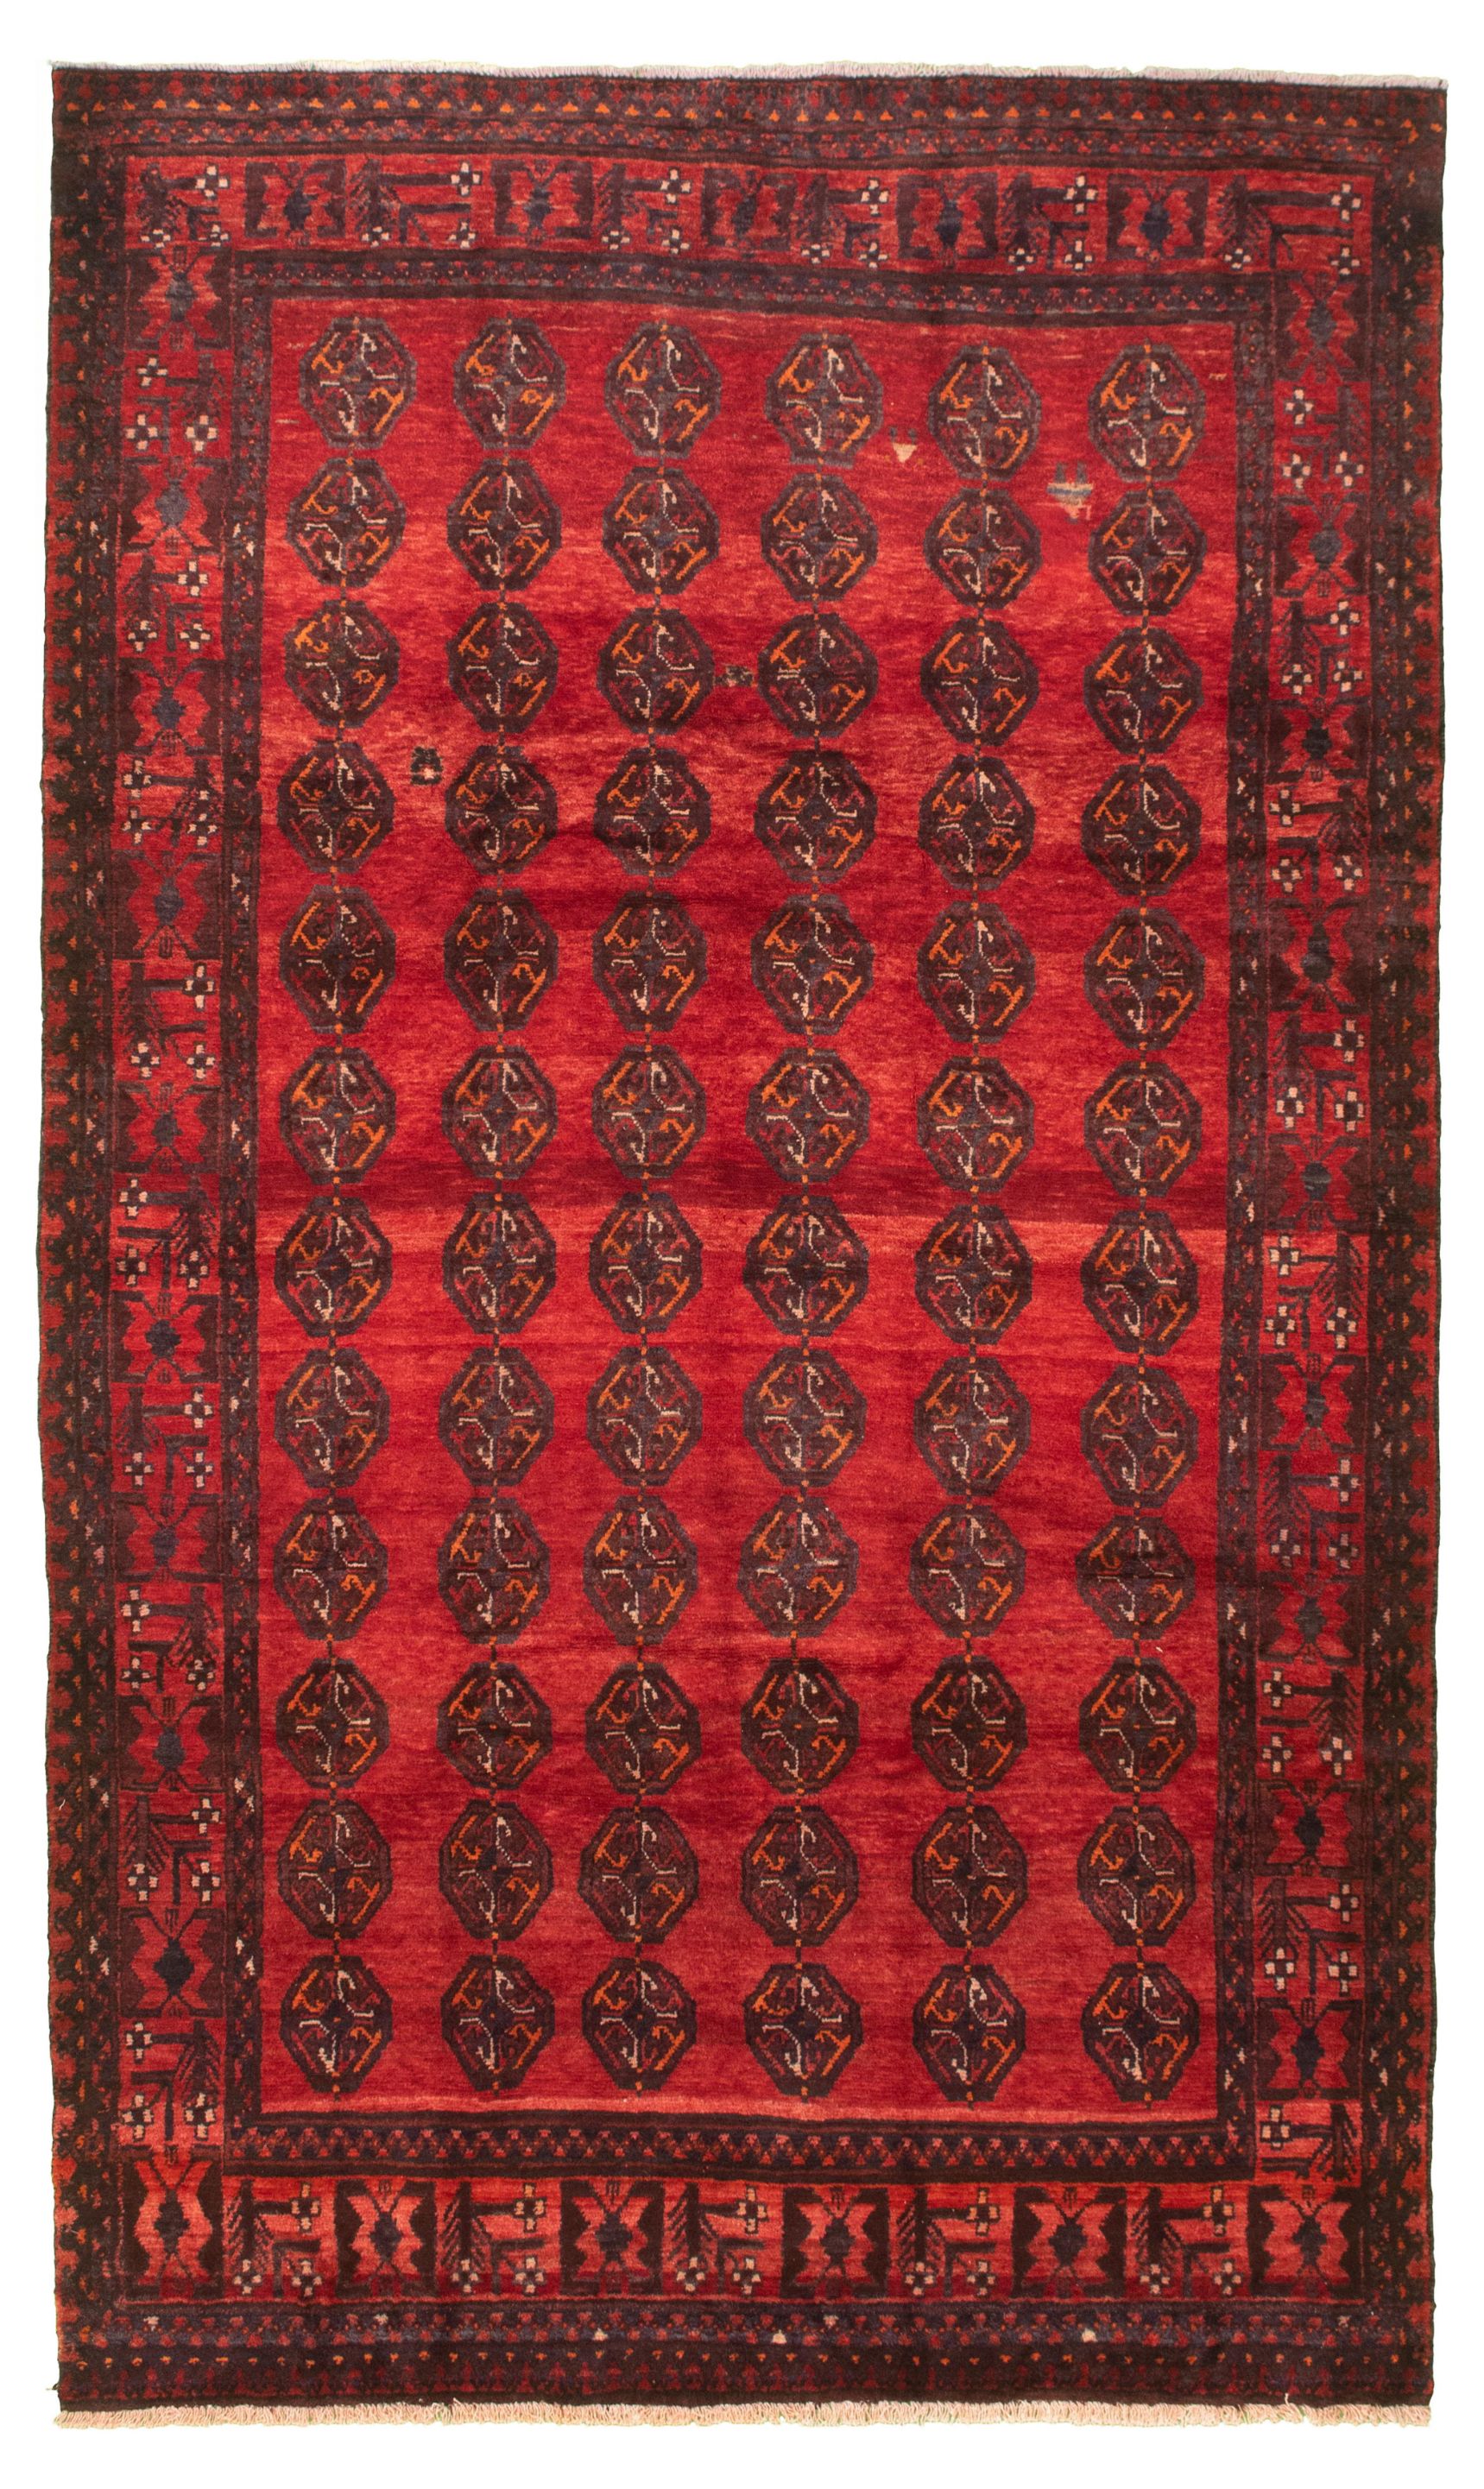 Hand-knotted Authentic Turkish Red Wool Rug 5'6" x 9'5" Size: 5'6" x 9'5"  